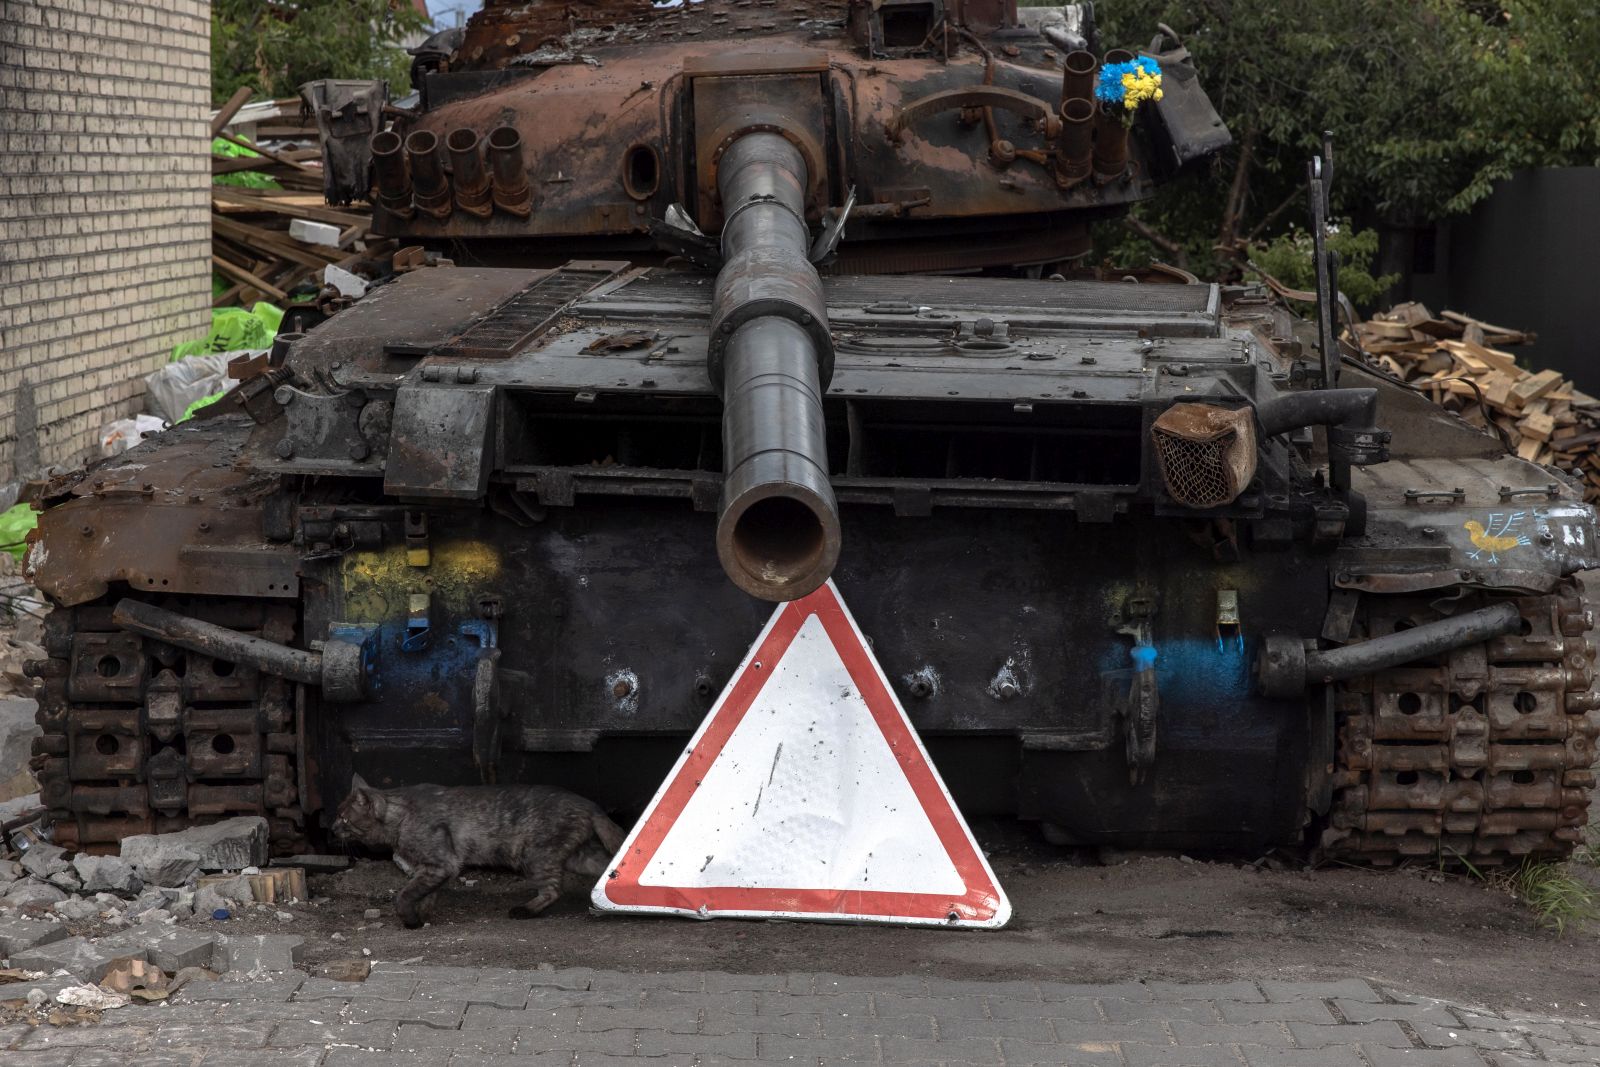 epa10080456 A cat runs past a Ukrainian tank that was destroyed during Russian attacks, in Hostomel, Ukraine, 19 July 2022. Hostomel, Irpin as well as other towns and villages in the northern part of the Kyiv region became battlefields and were heavily shelled when Russian troops tried to reach the Ukrainian capital Kyiv in February and March 2022. Russian troops on 24 February entered Ukrainian territory, starting a conflict that has provoked destruction and a humanitarian crisis.  EPA/ROMAN PILIPEY